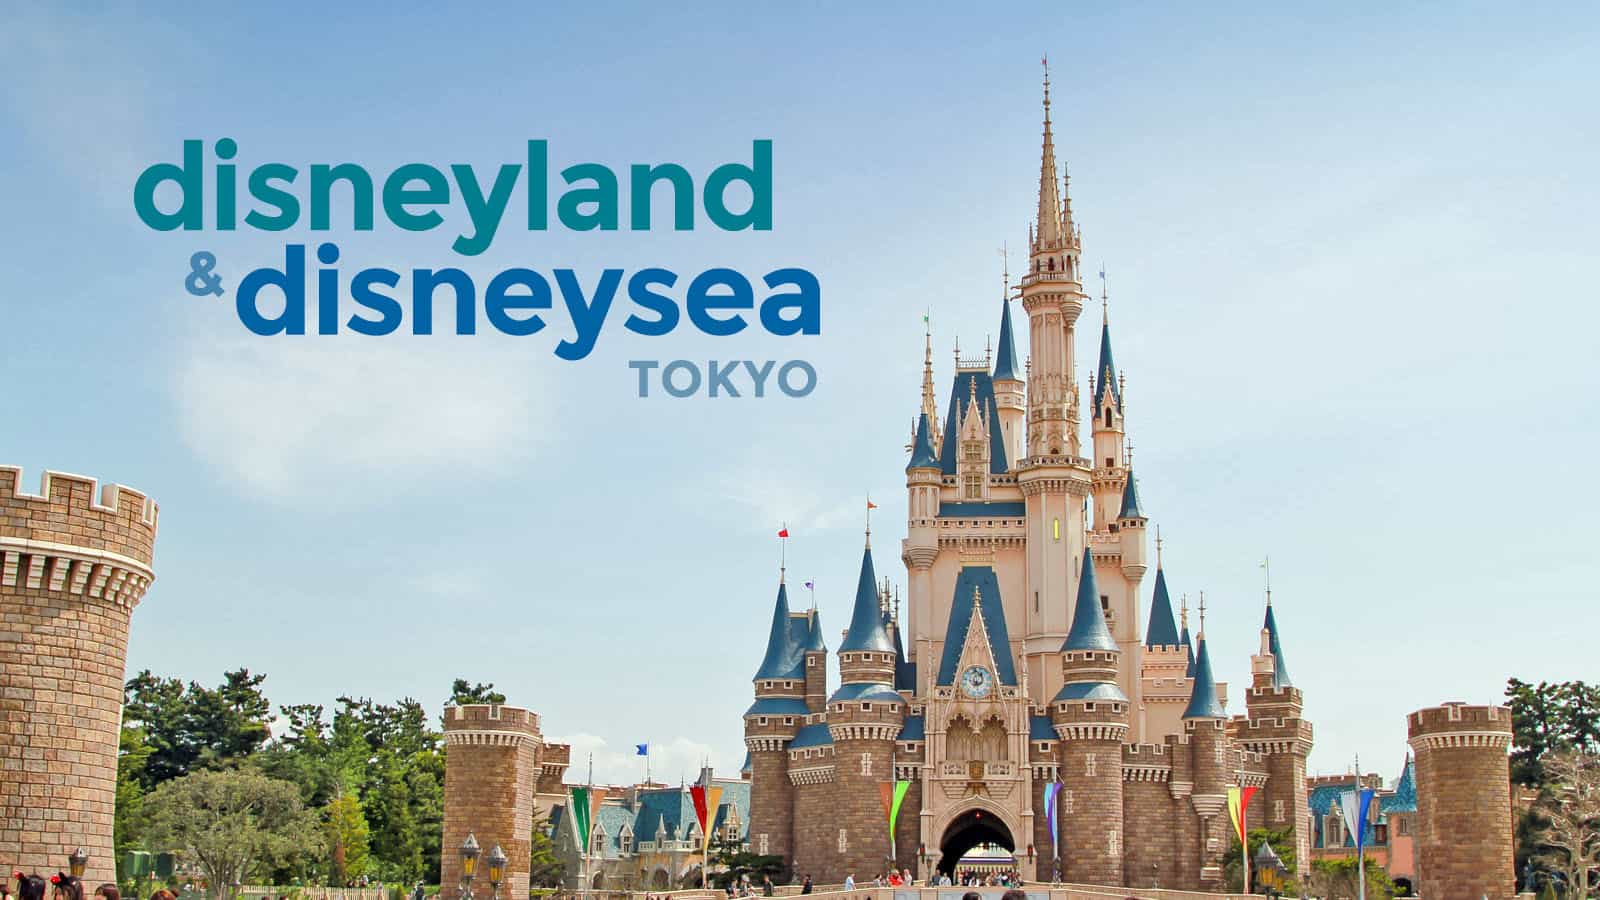 Tokyo Disneyland Disneysea Guide For First Timers The Poor Traveler Itinerary Blog